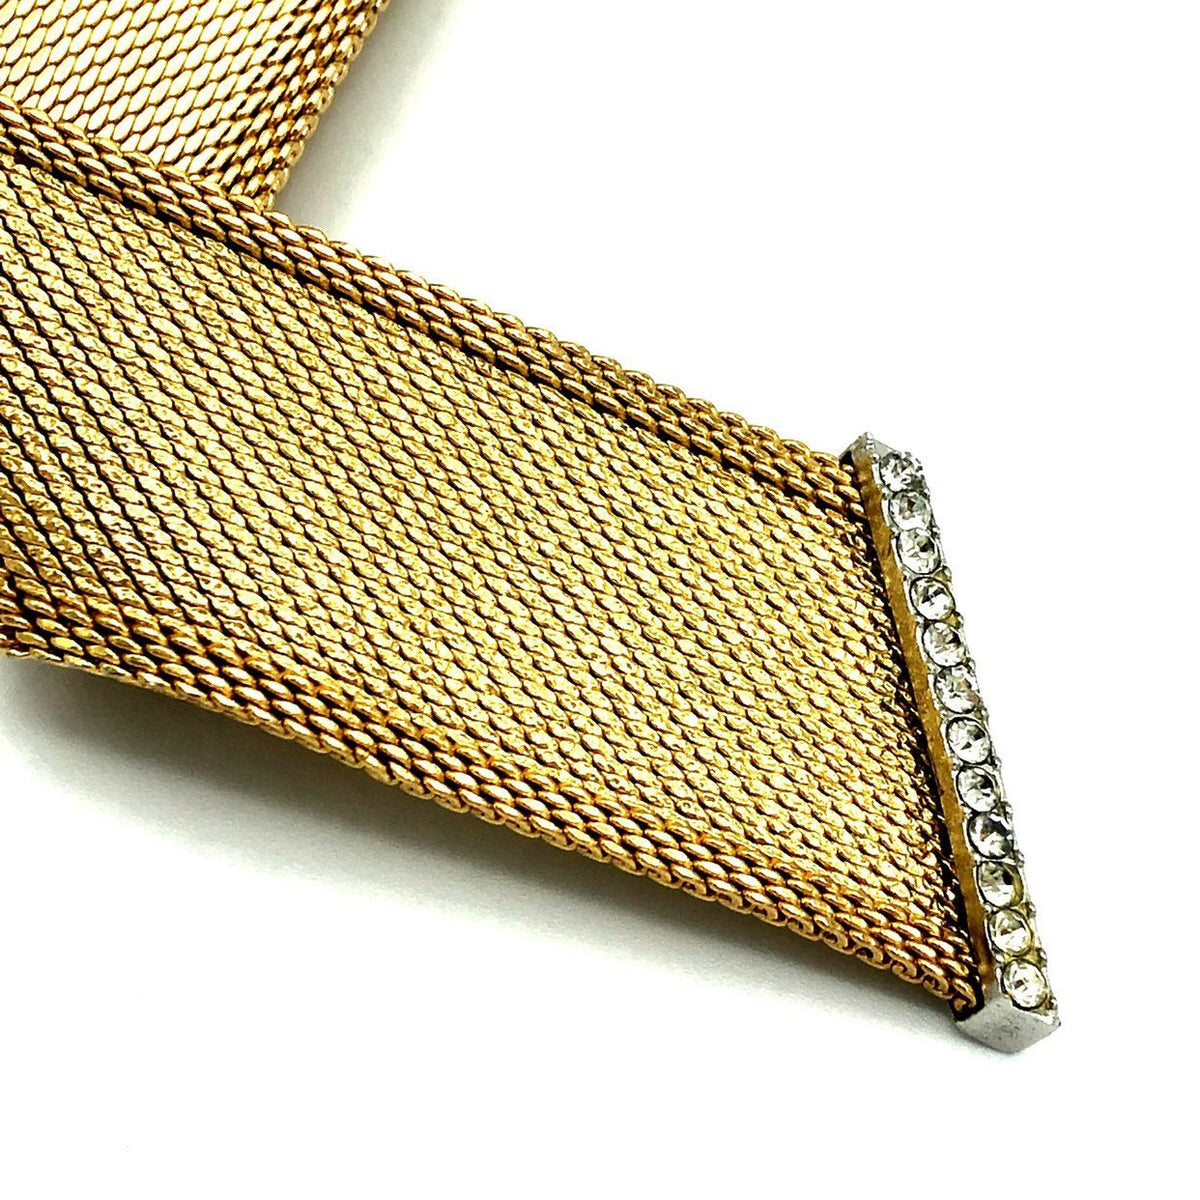 Gold Christian Dior Mesh Ribbon Classic Vintage Brooch - 24 Wishes Vintage Jewelry